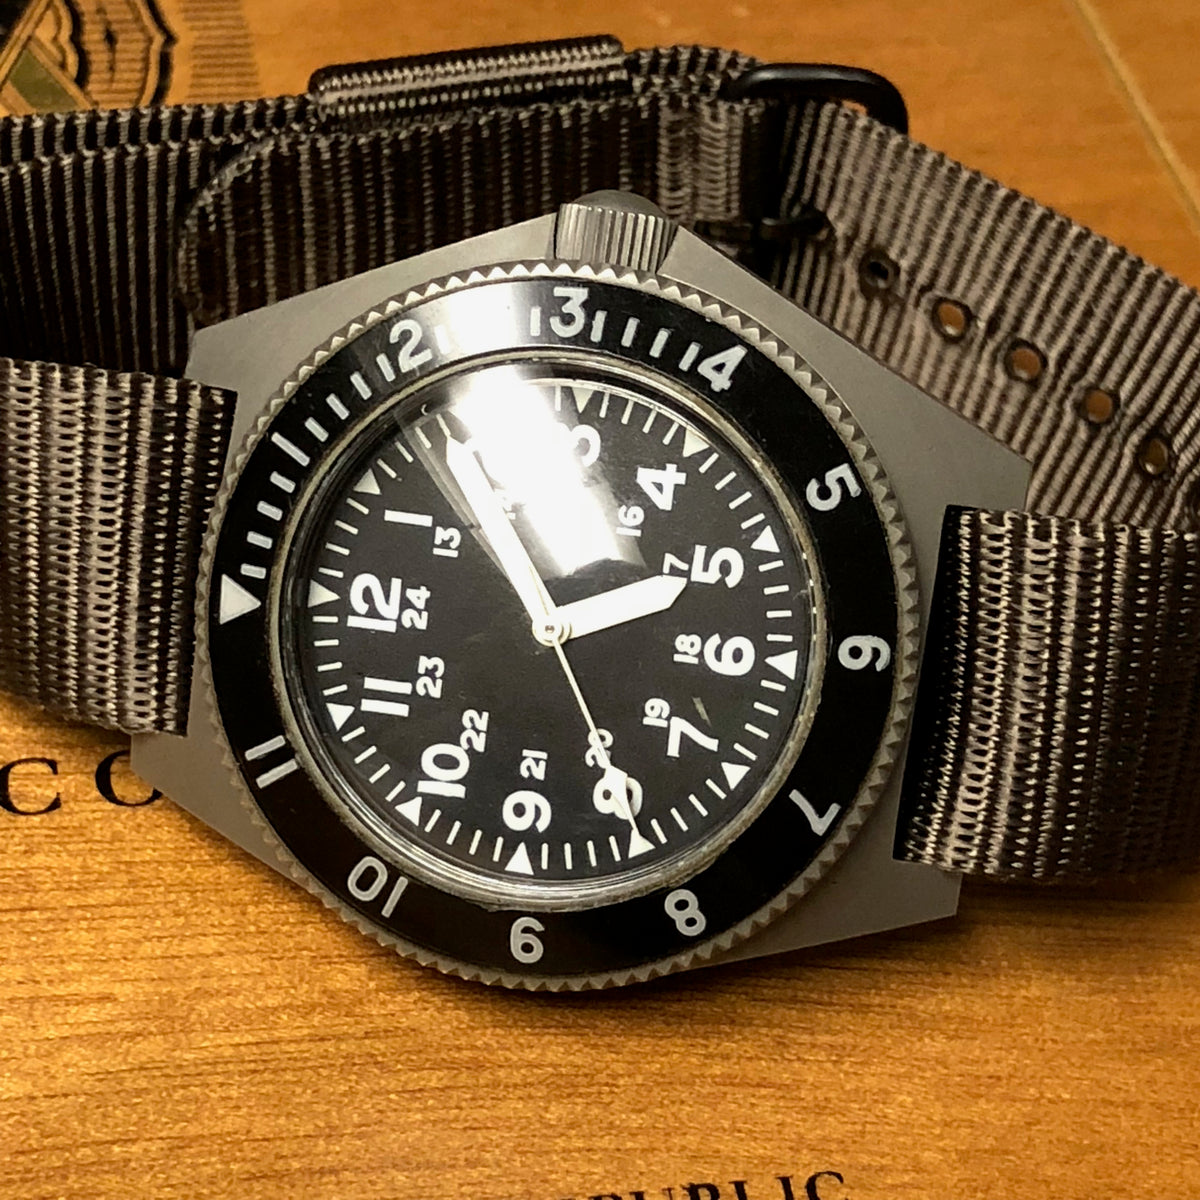 Sold - Benrus Type II Class B MIL-W-50717 Military Dive Watch With Hac ...